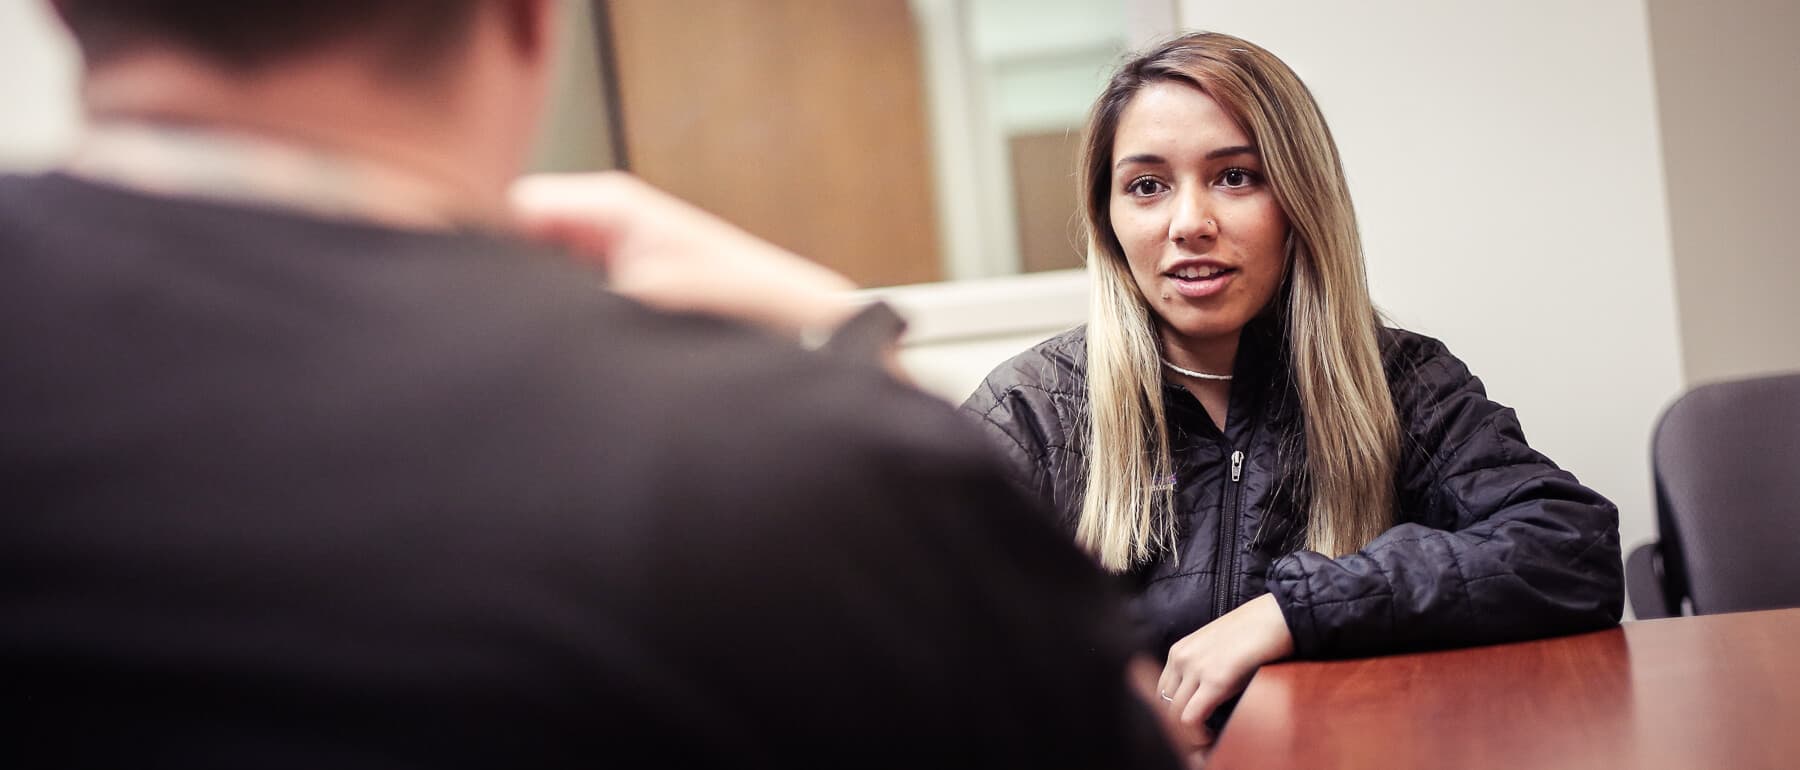 A UWGB student partakes in a mock interview for a Social Work class.